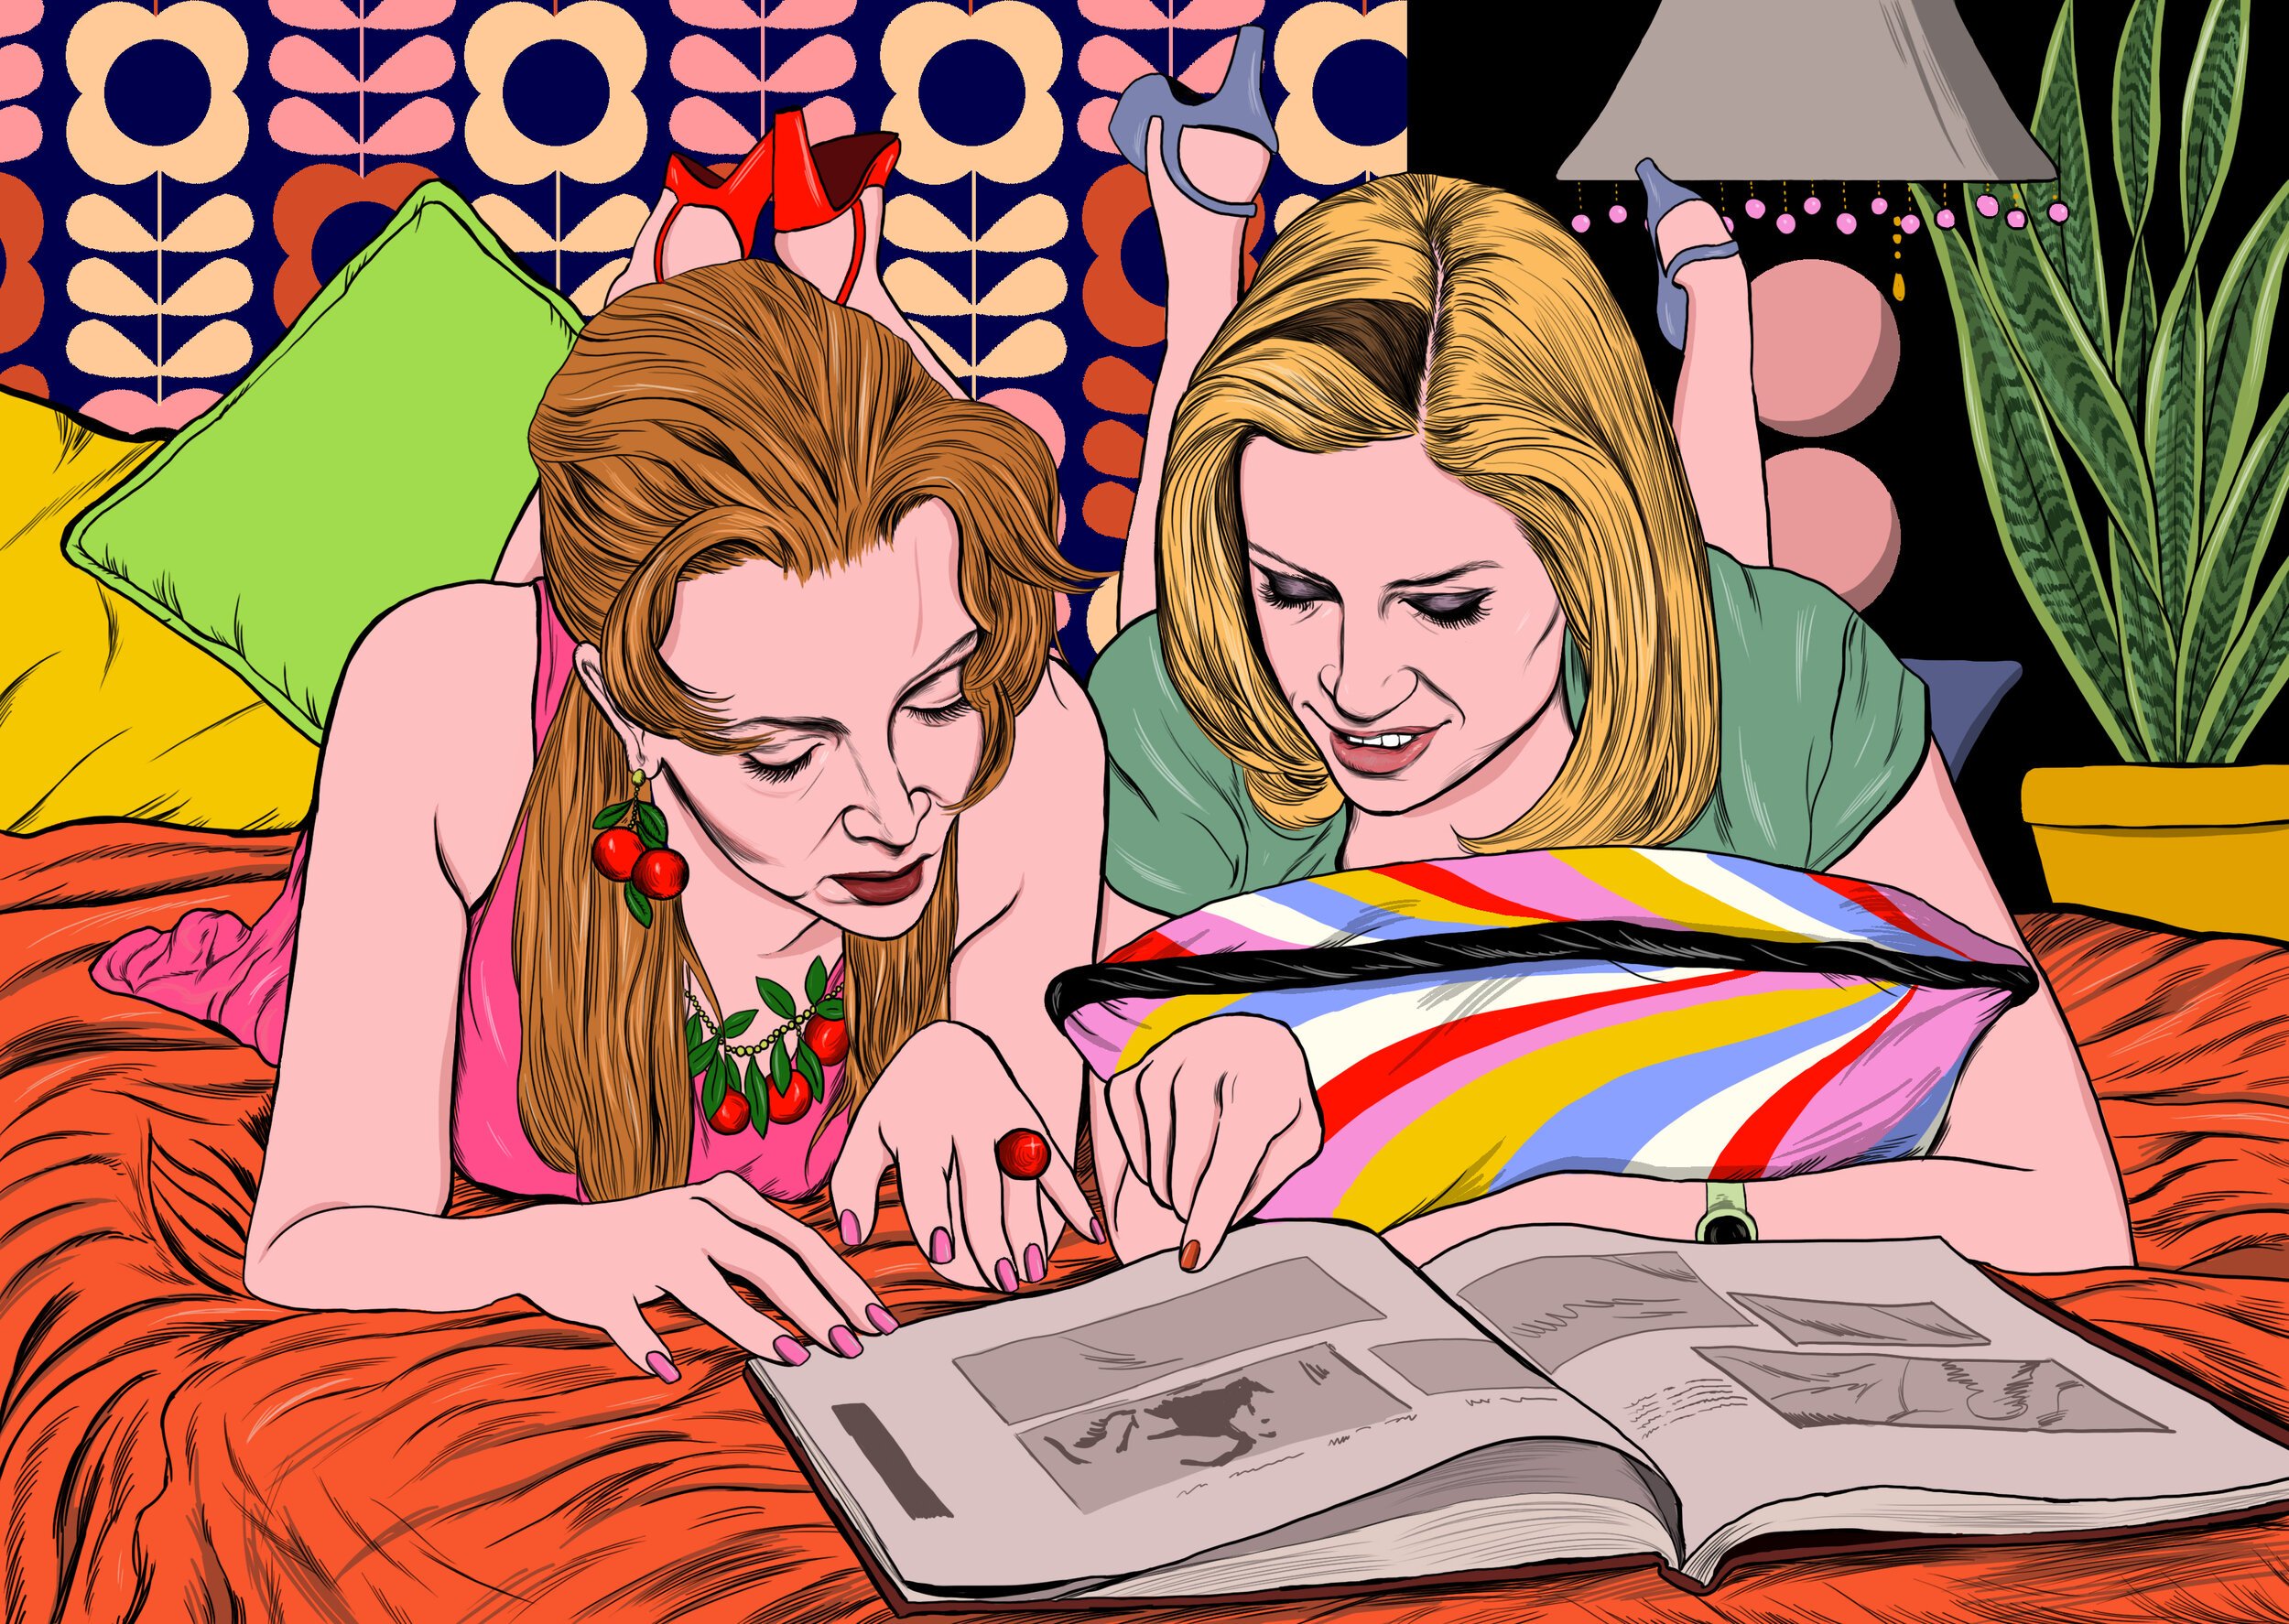  Portrait of Romy and Michele  